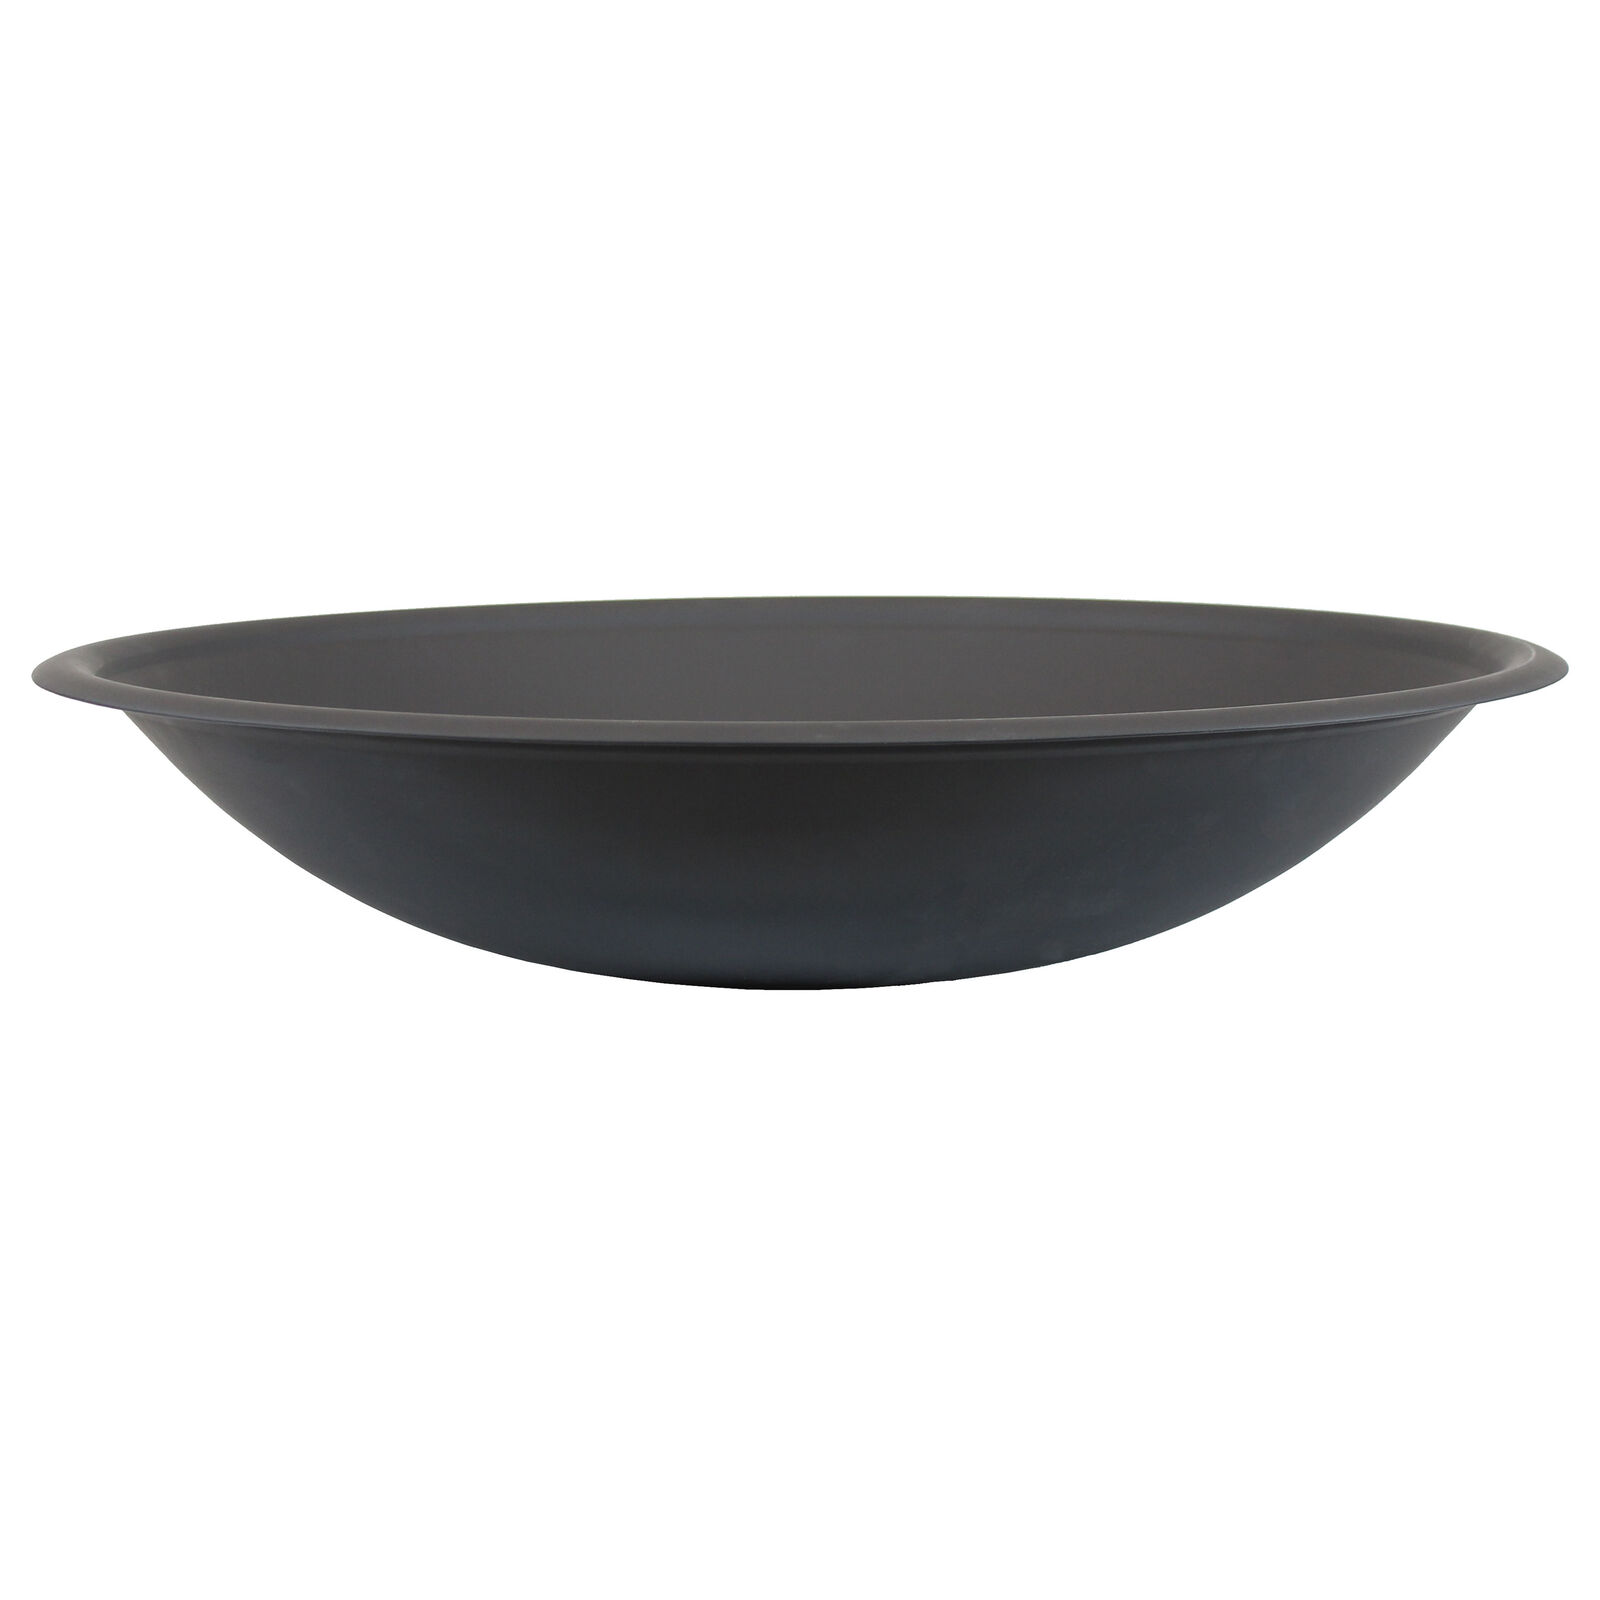 23 in Classic Elegance Steel Replacement Fire Pit Bowl - Black by Sunnydaze